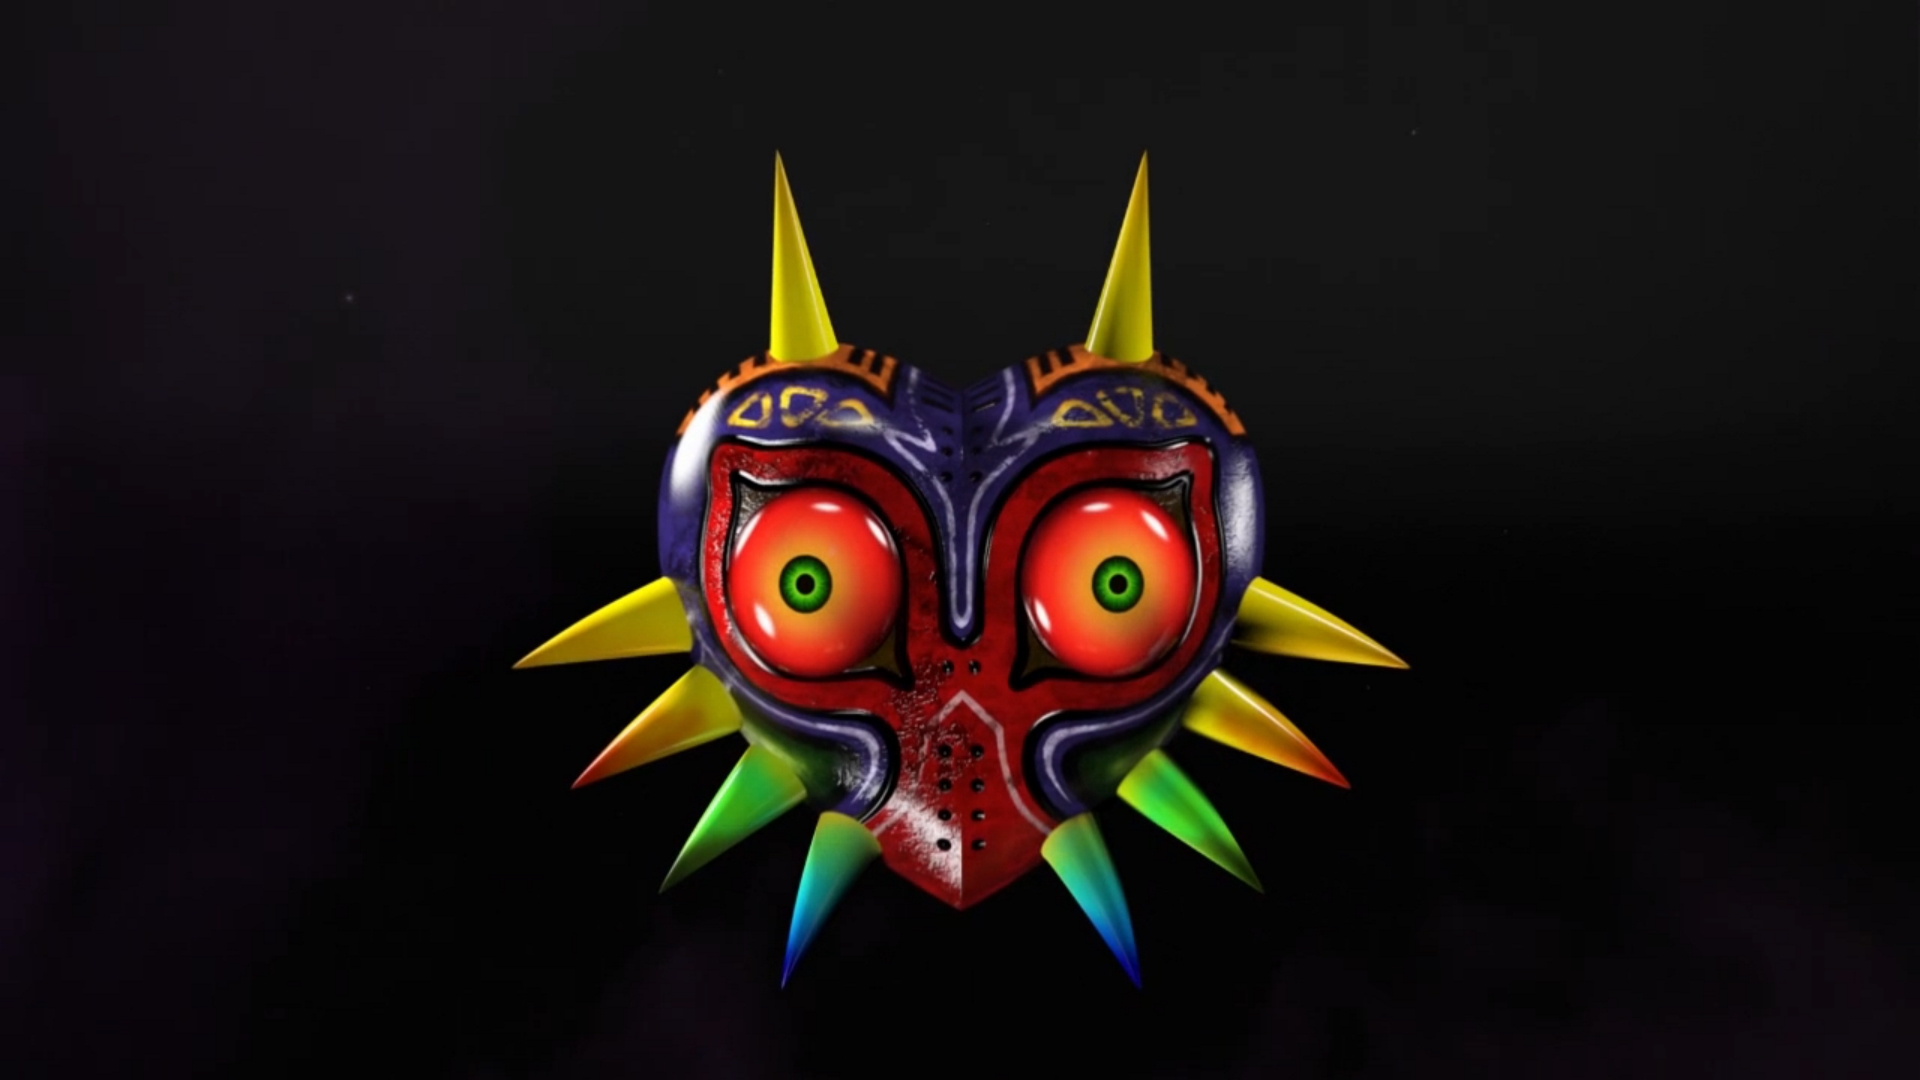 The Above Majora S Mask Wallpaper Are As Follows